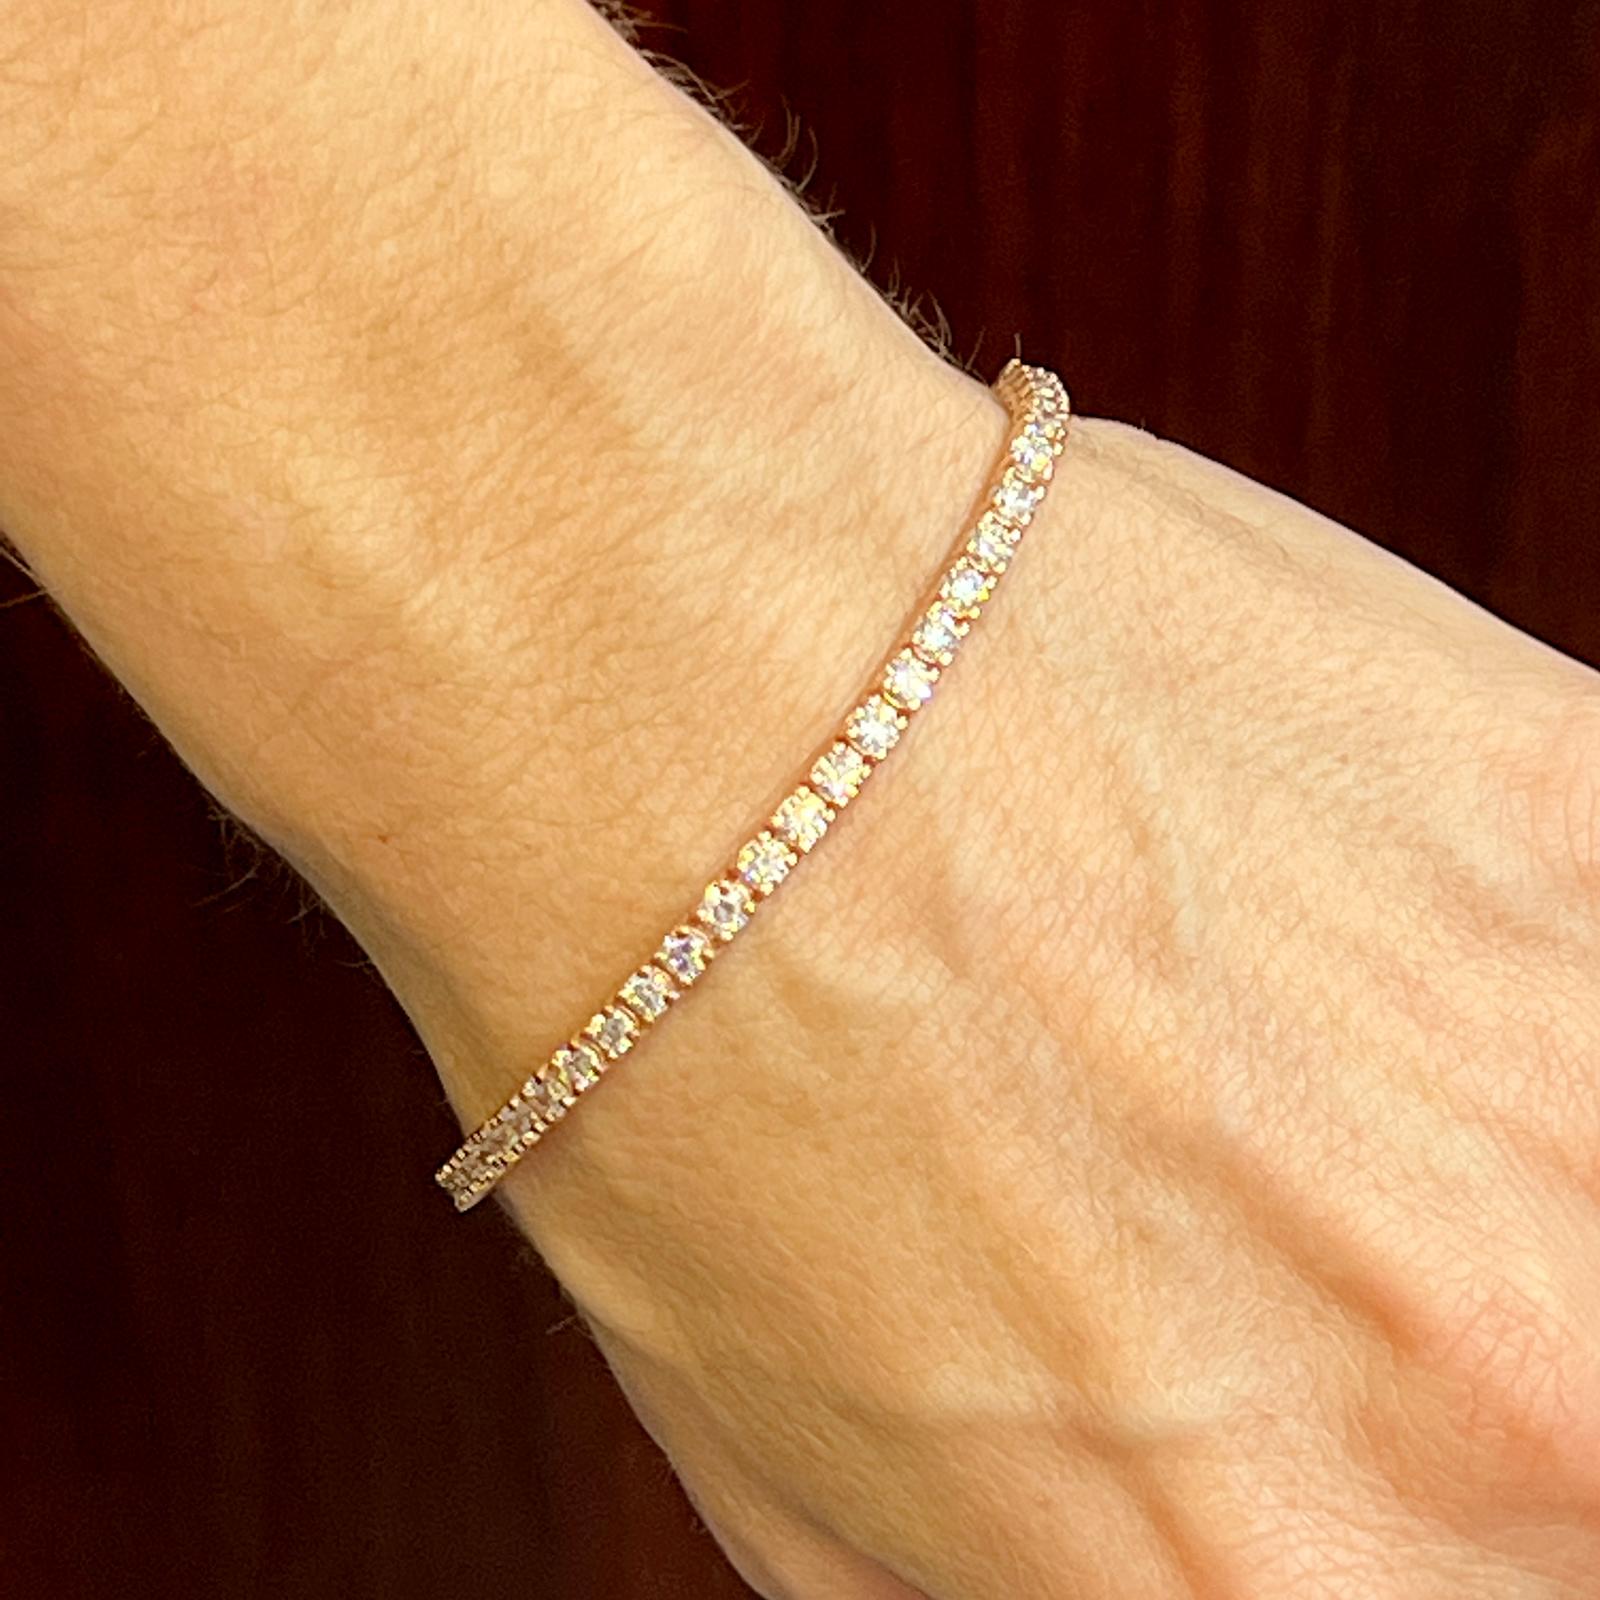 Round brilliant diamond tennis bracelet crafted in 14 karat rose gold. The bracelet features 51 round brilliant cut diamonds weighing 5.08 carat total weight. The vibrant diamonds are graded G-H color and SI clartity. The bracelet measures 7.0